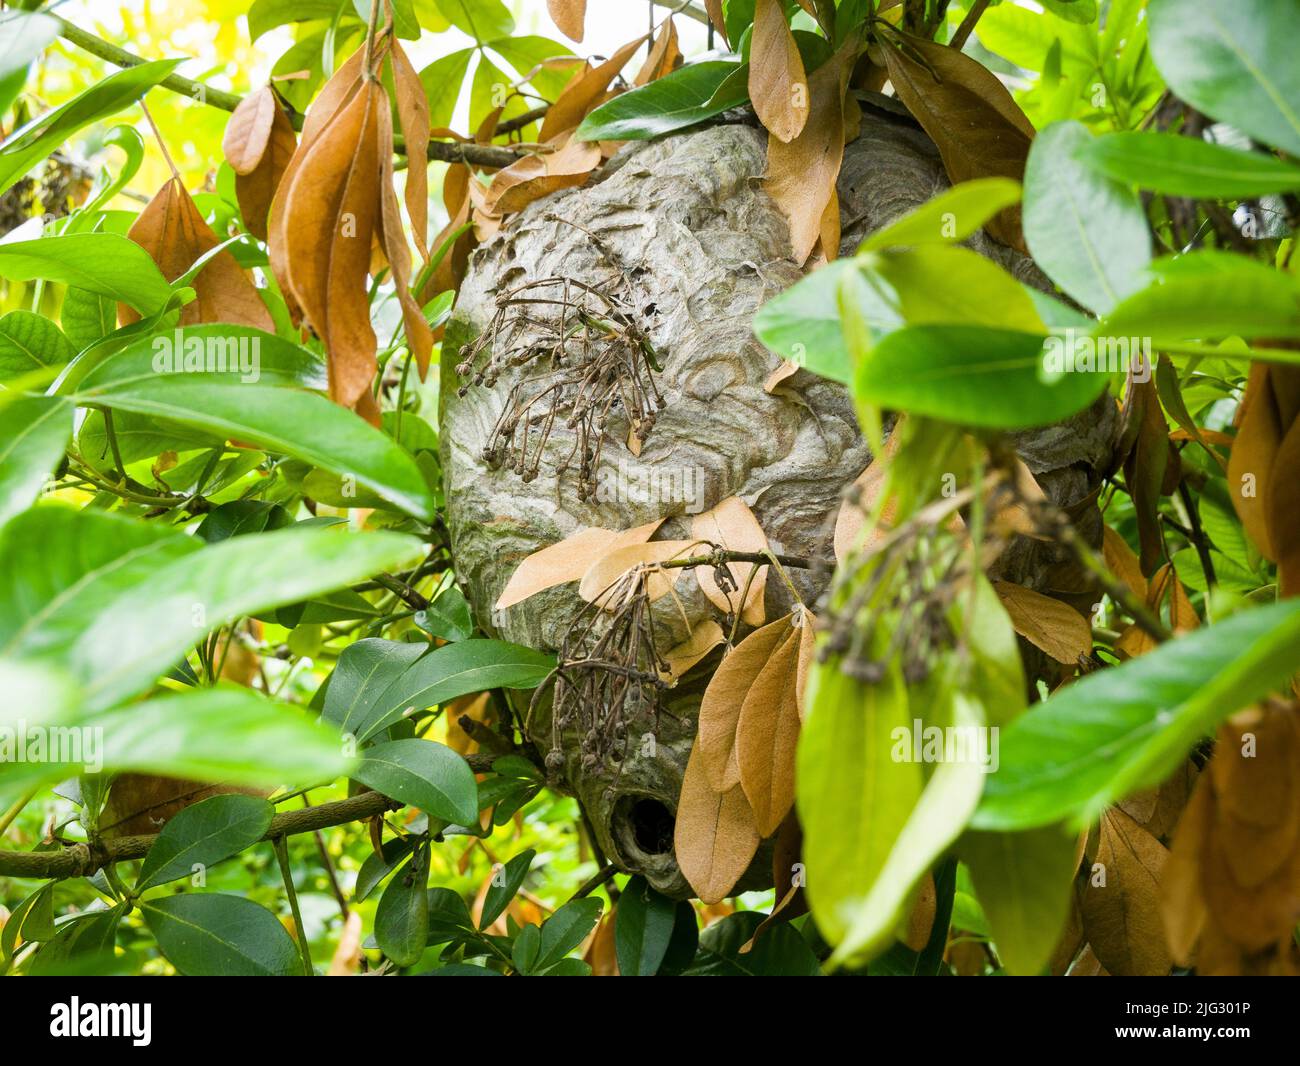 A Median Wasp (Dolichovespula media) nest in a laurel tree in a garden in late summer. Somerset, England. Stock Photo